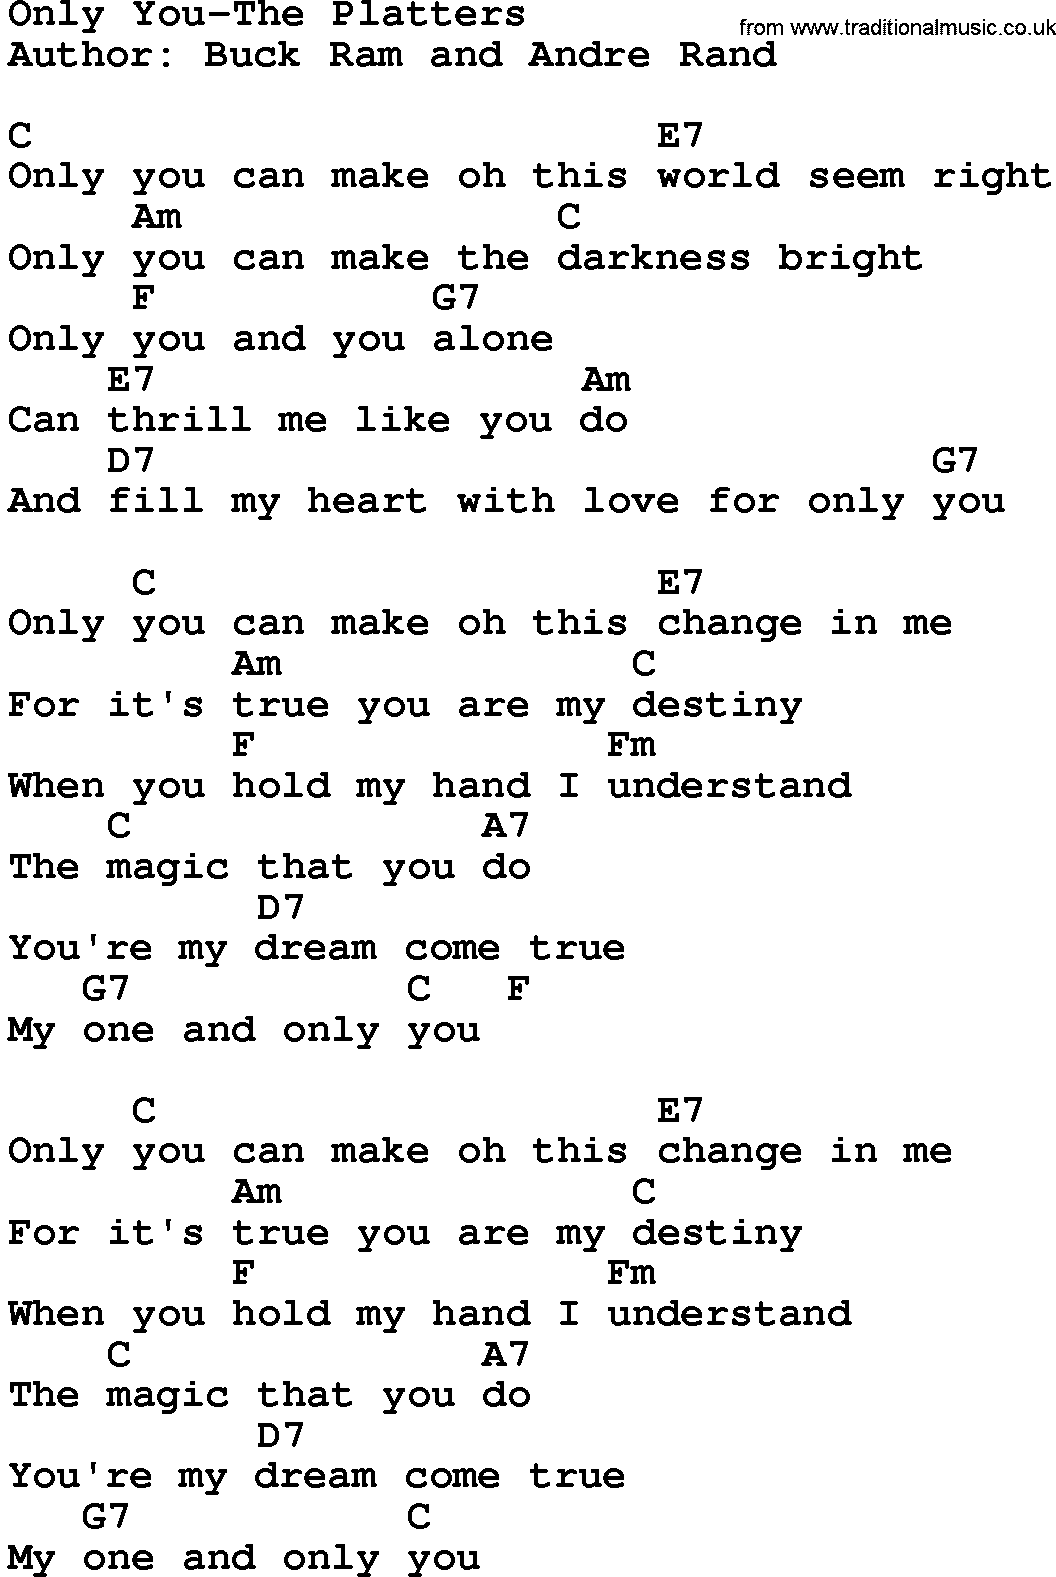 Only You (Cover Version of The Platters) | JN Creative Entertainment1056 x 1577